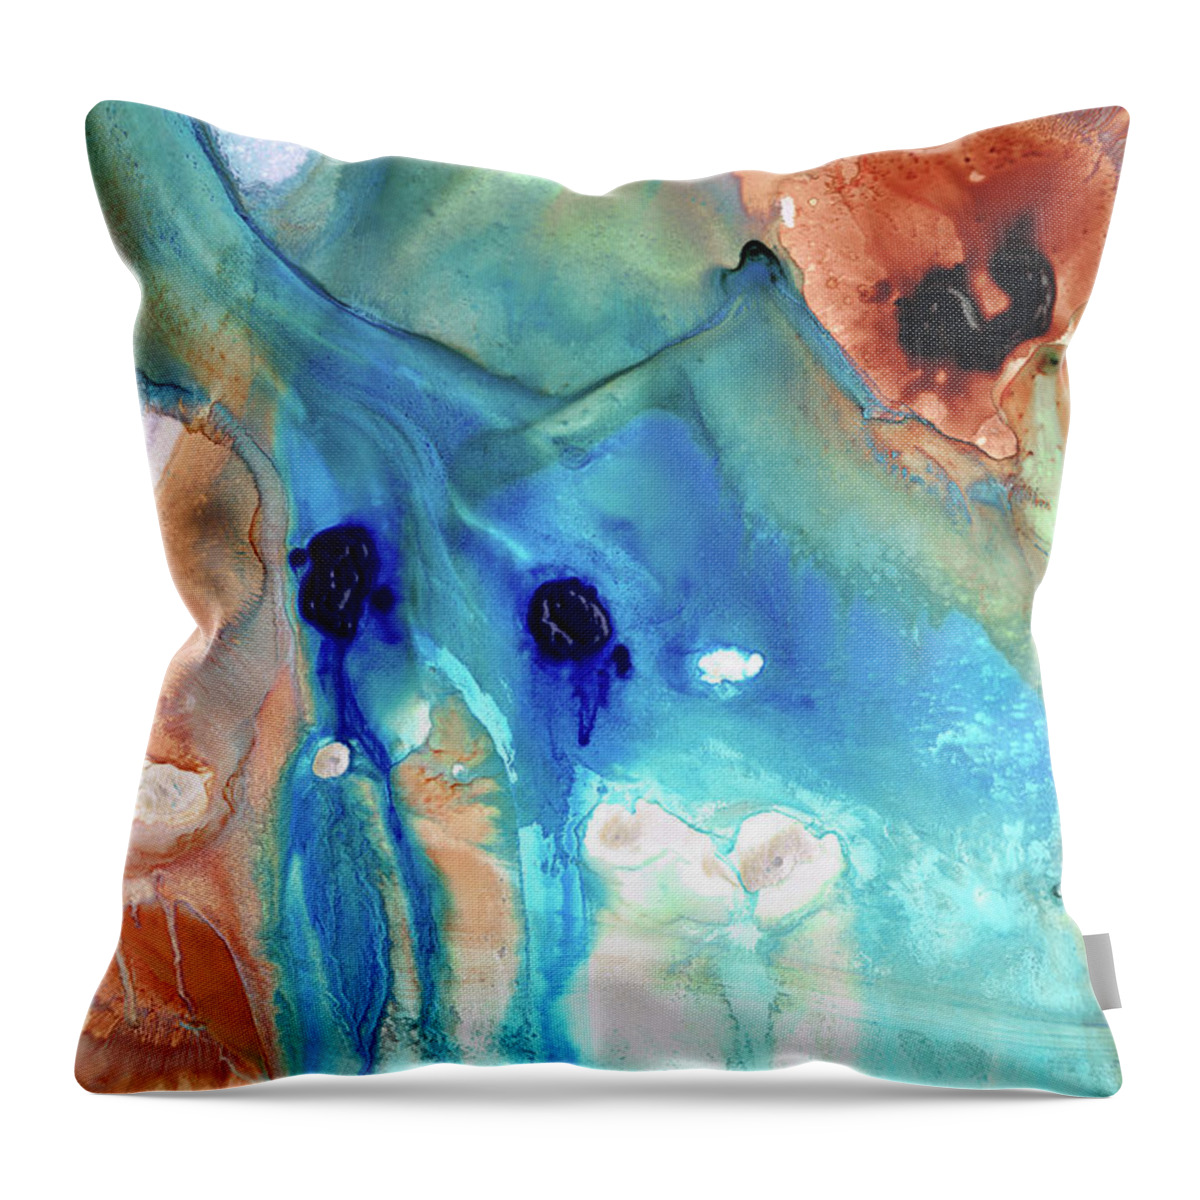 Abstract Art Throw Pillow featuring the painting Abstract Art - The Journey Home - Sharon Cummings by Sharon Cummings